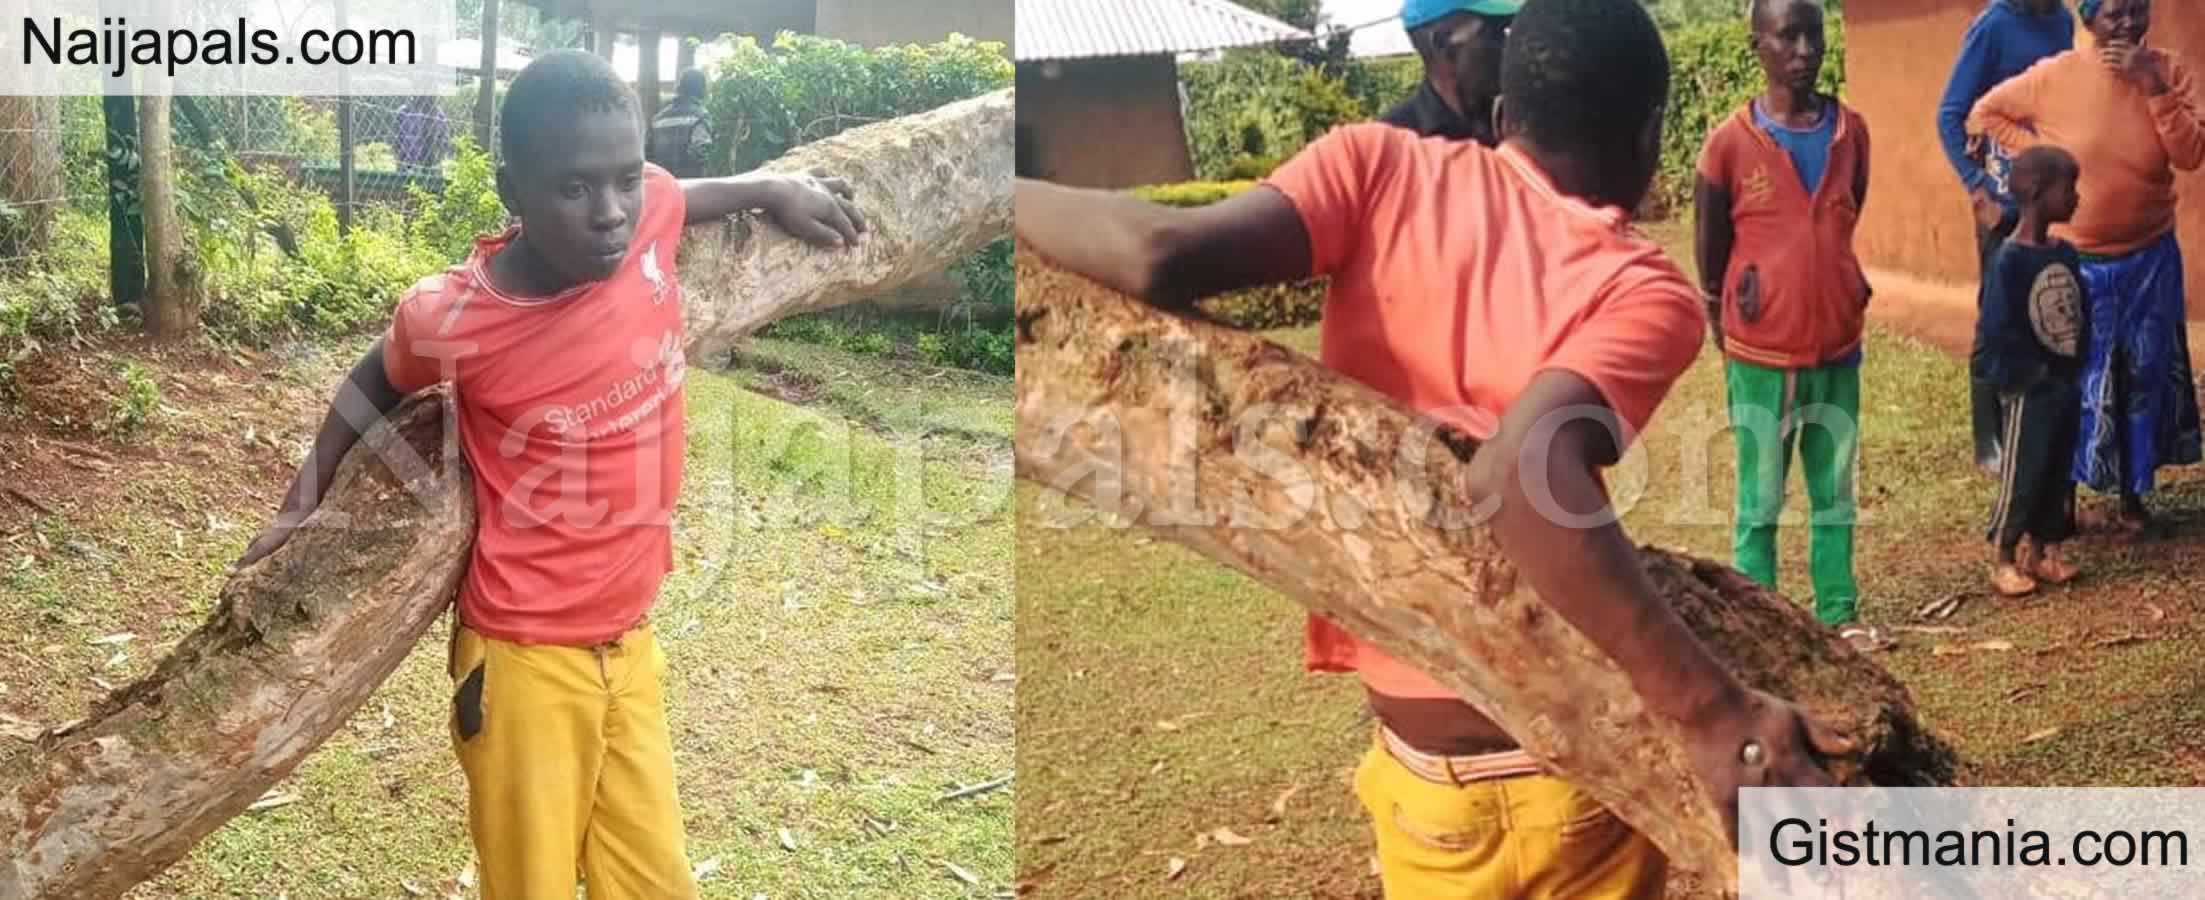 Photos Check Out How 19 Year Old Man Nailed To A Tree For Allegedly